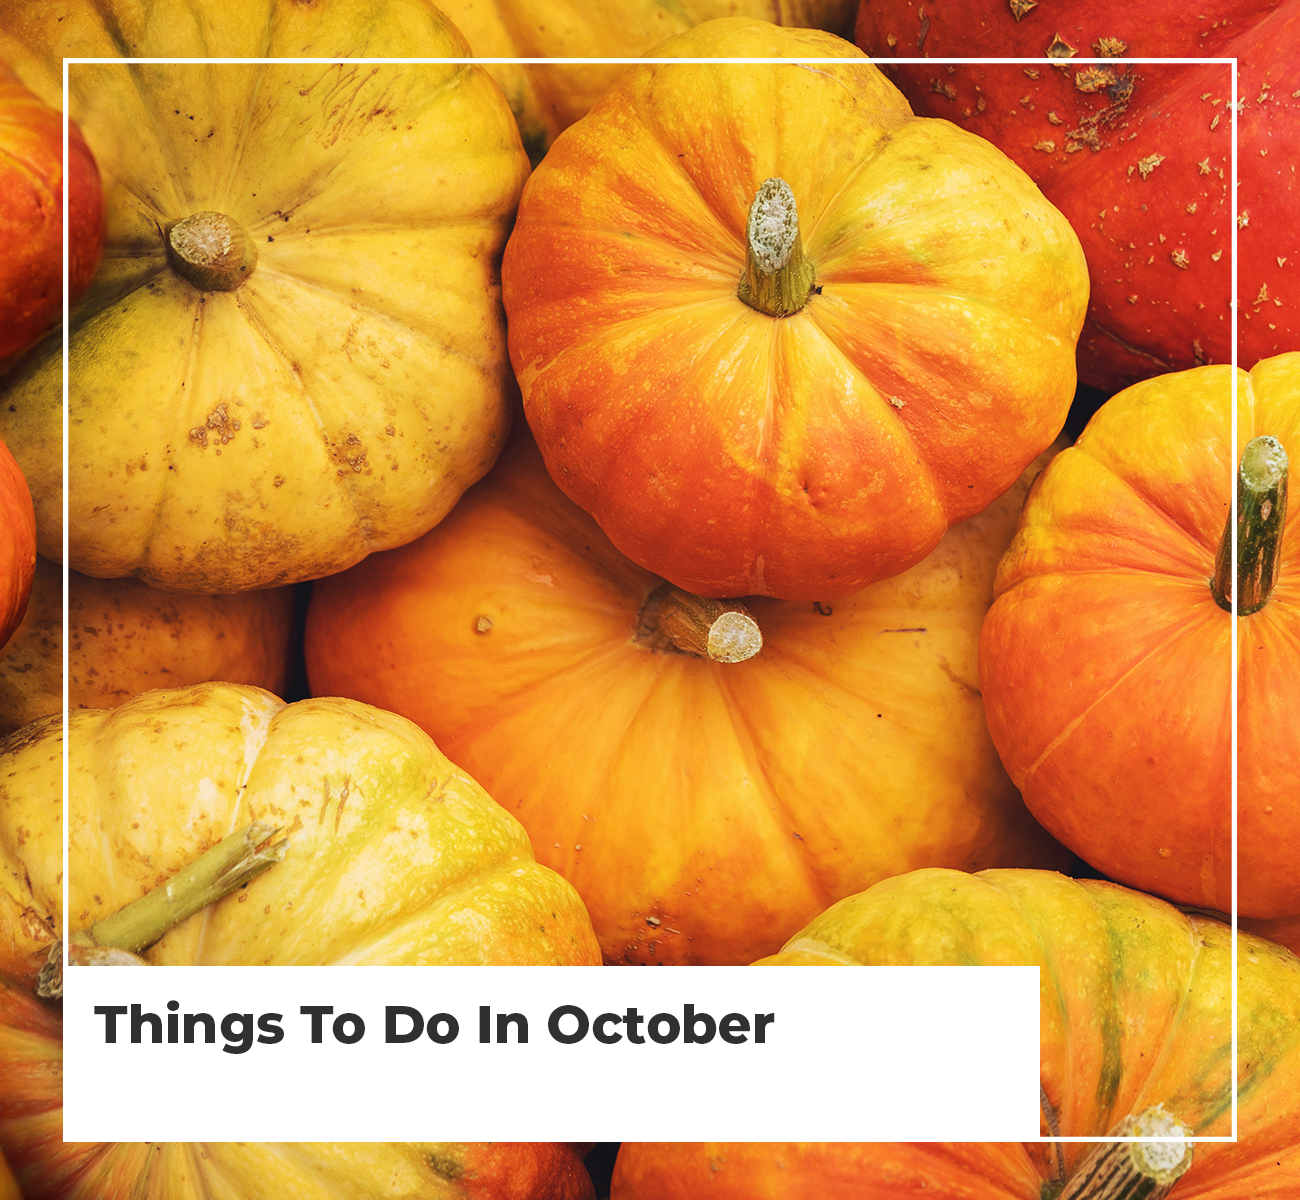 Things To Do In October - Main Image